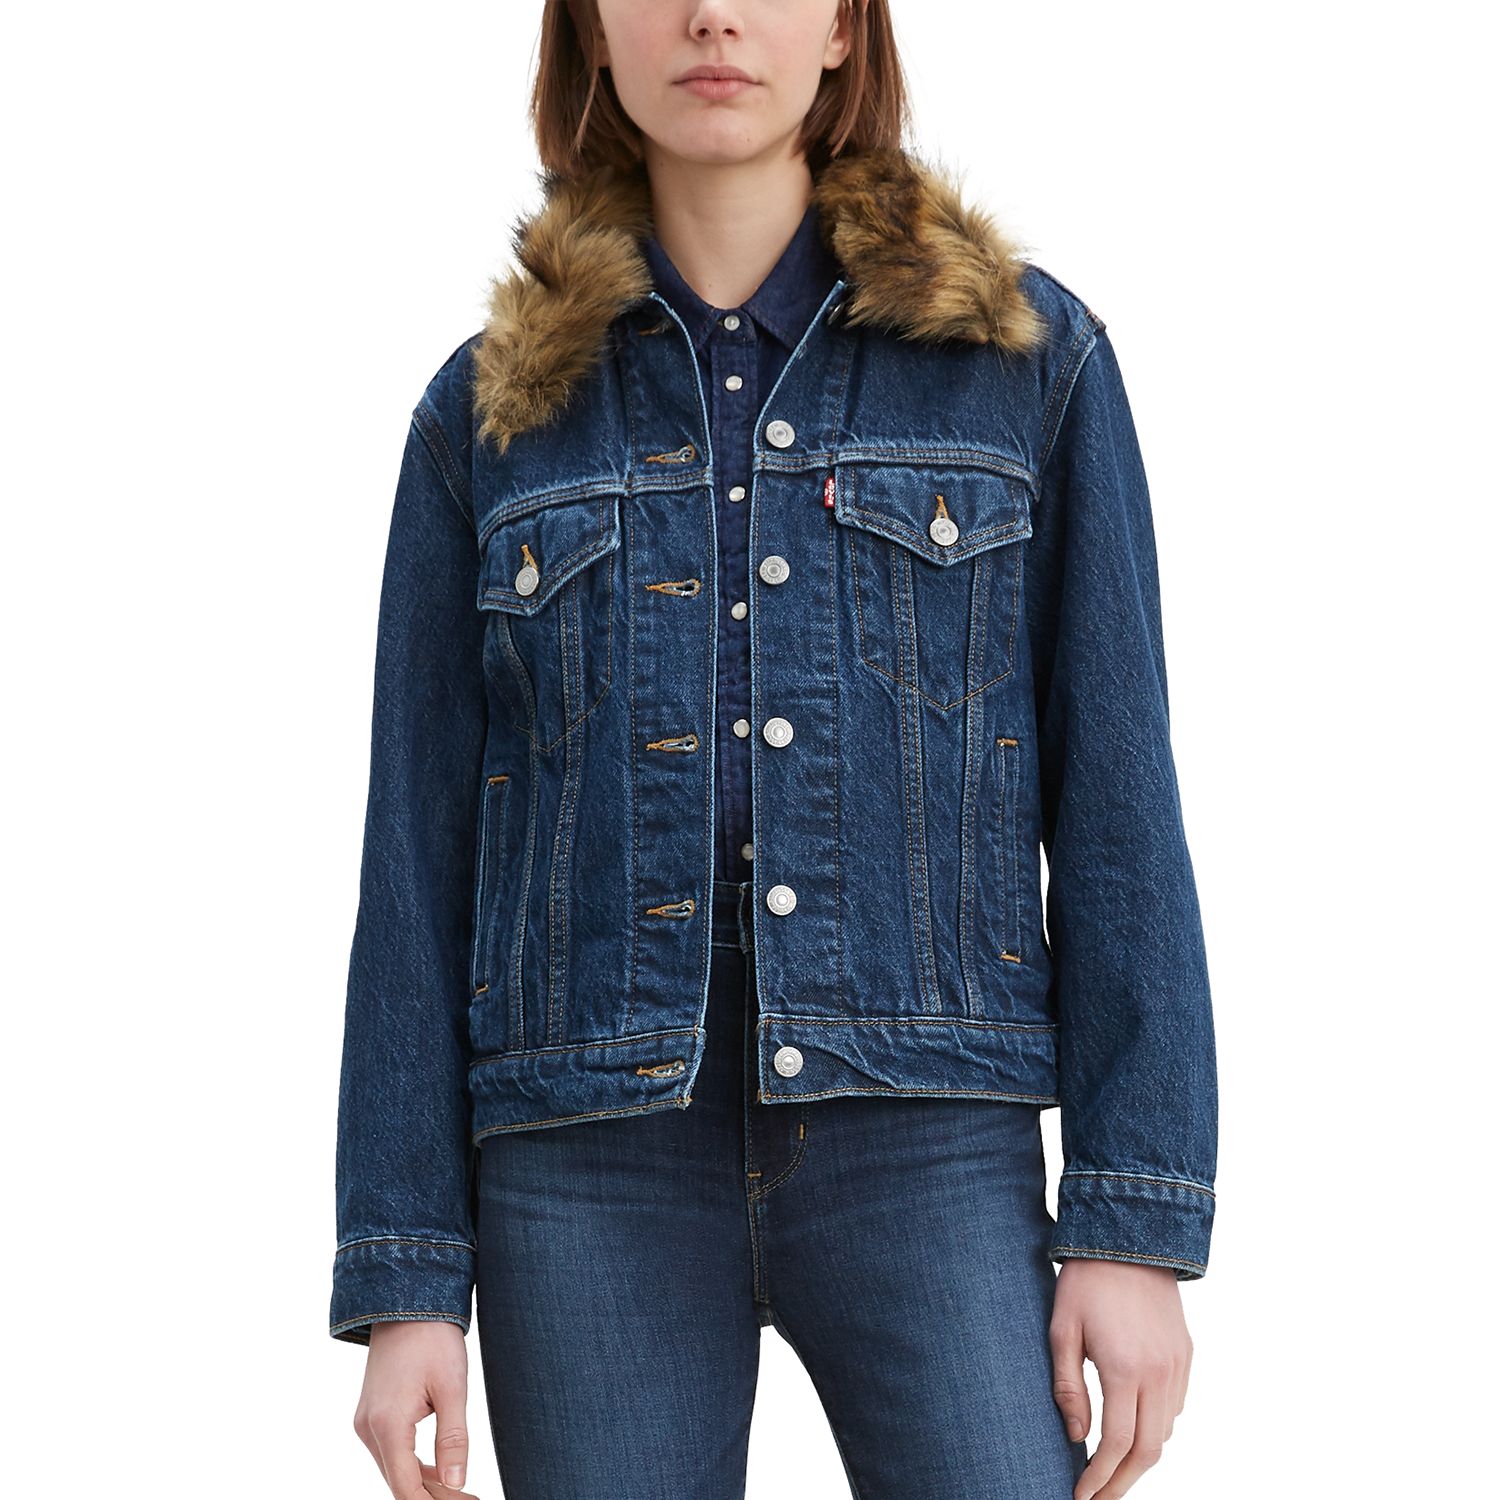 levis jacket with fur collar